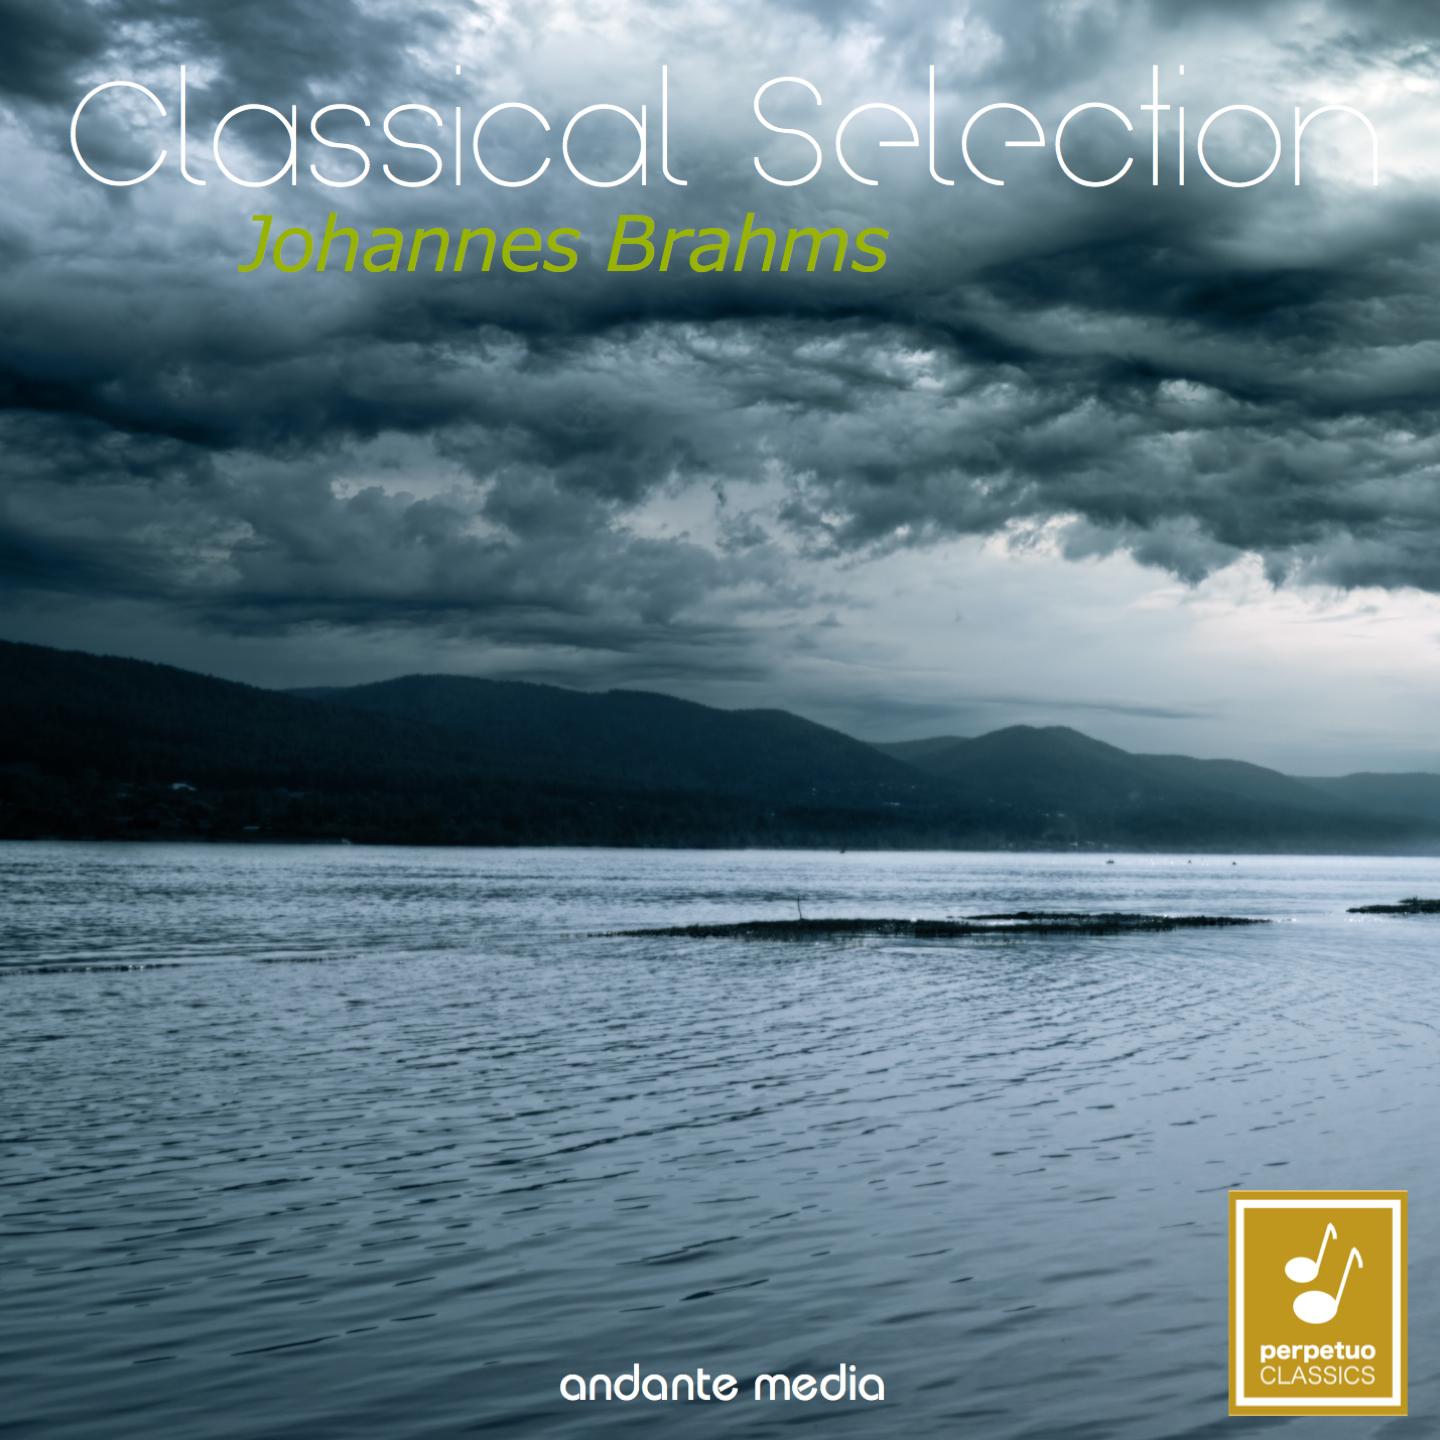 Sonata No. 1 for Viola and Piano in F Minor, Op. 120: IV. Vivace